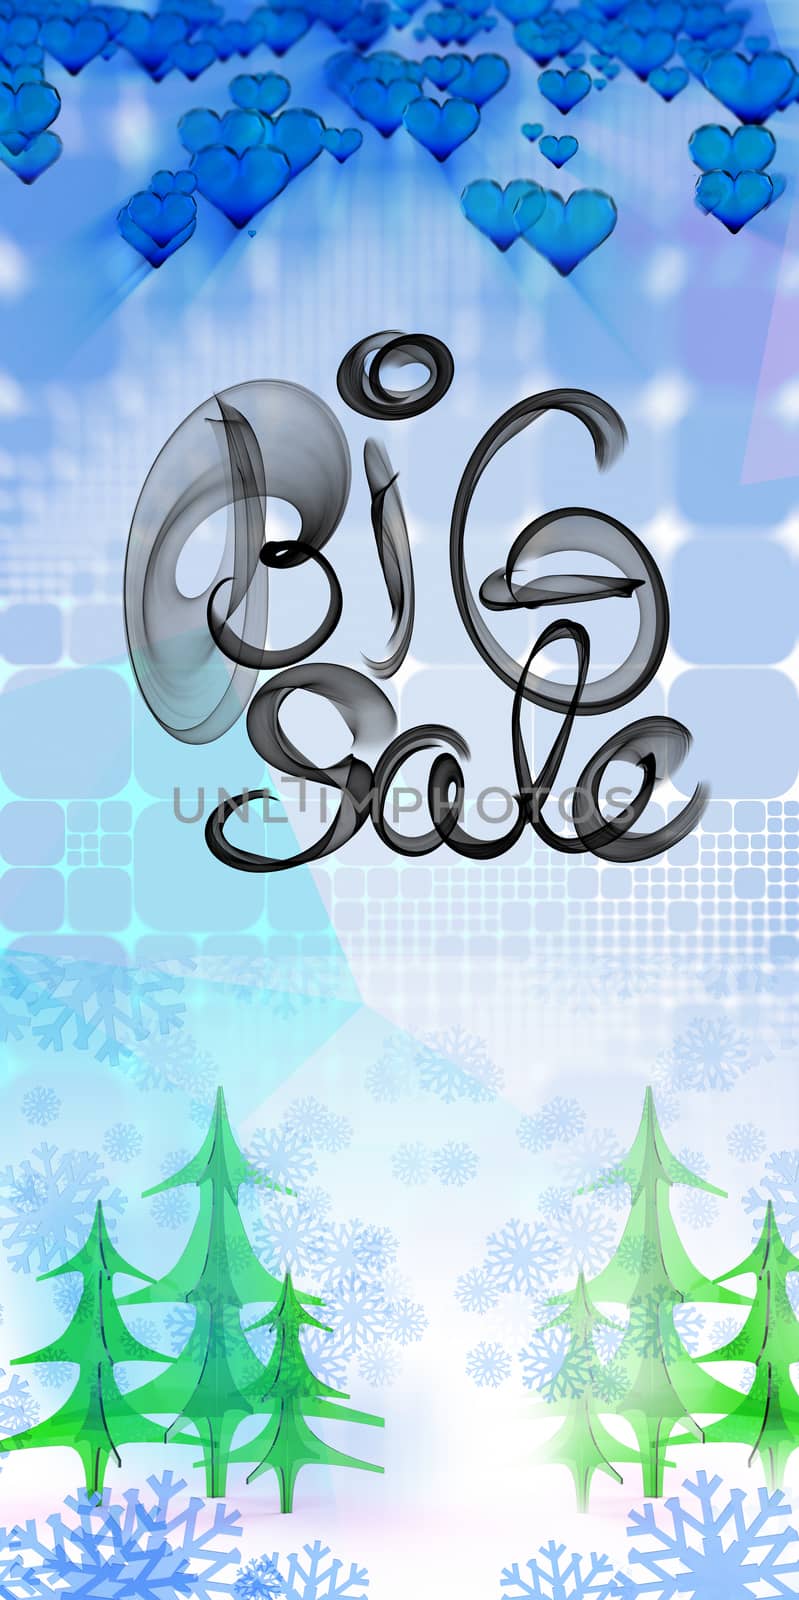 Big sale lettering written with black smoke or flame on geometric square abstract background with christmas tree and snowflake. 3d illustration.